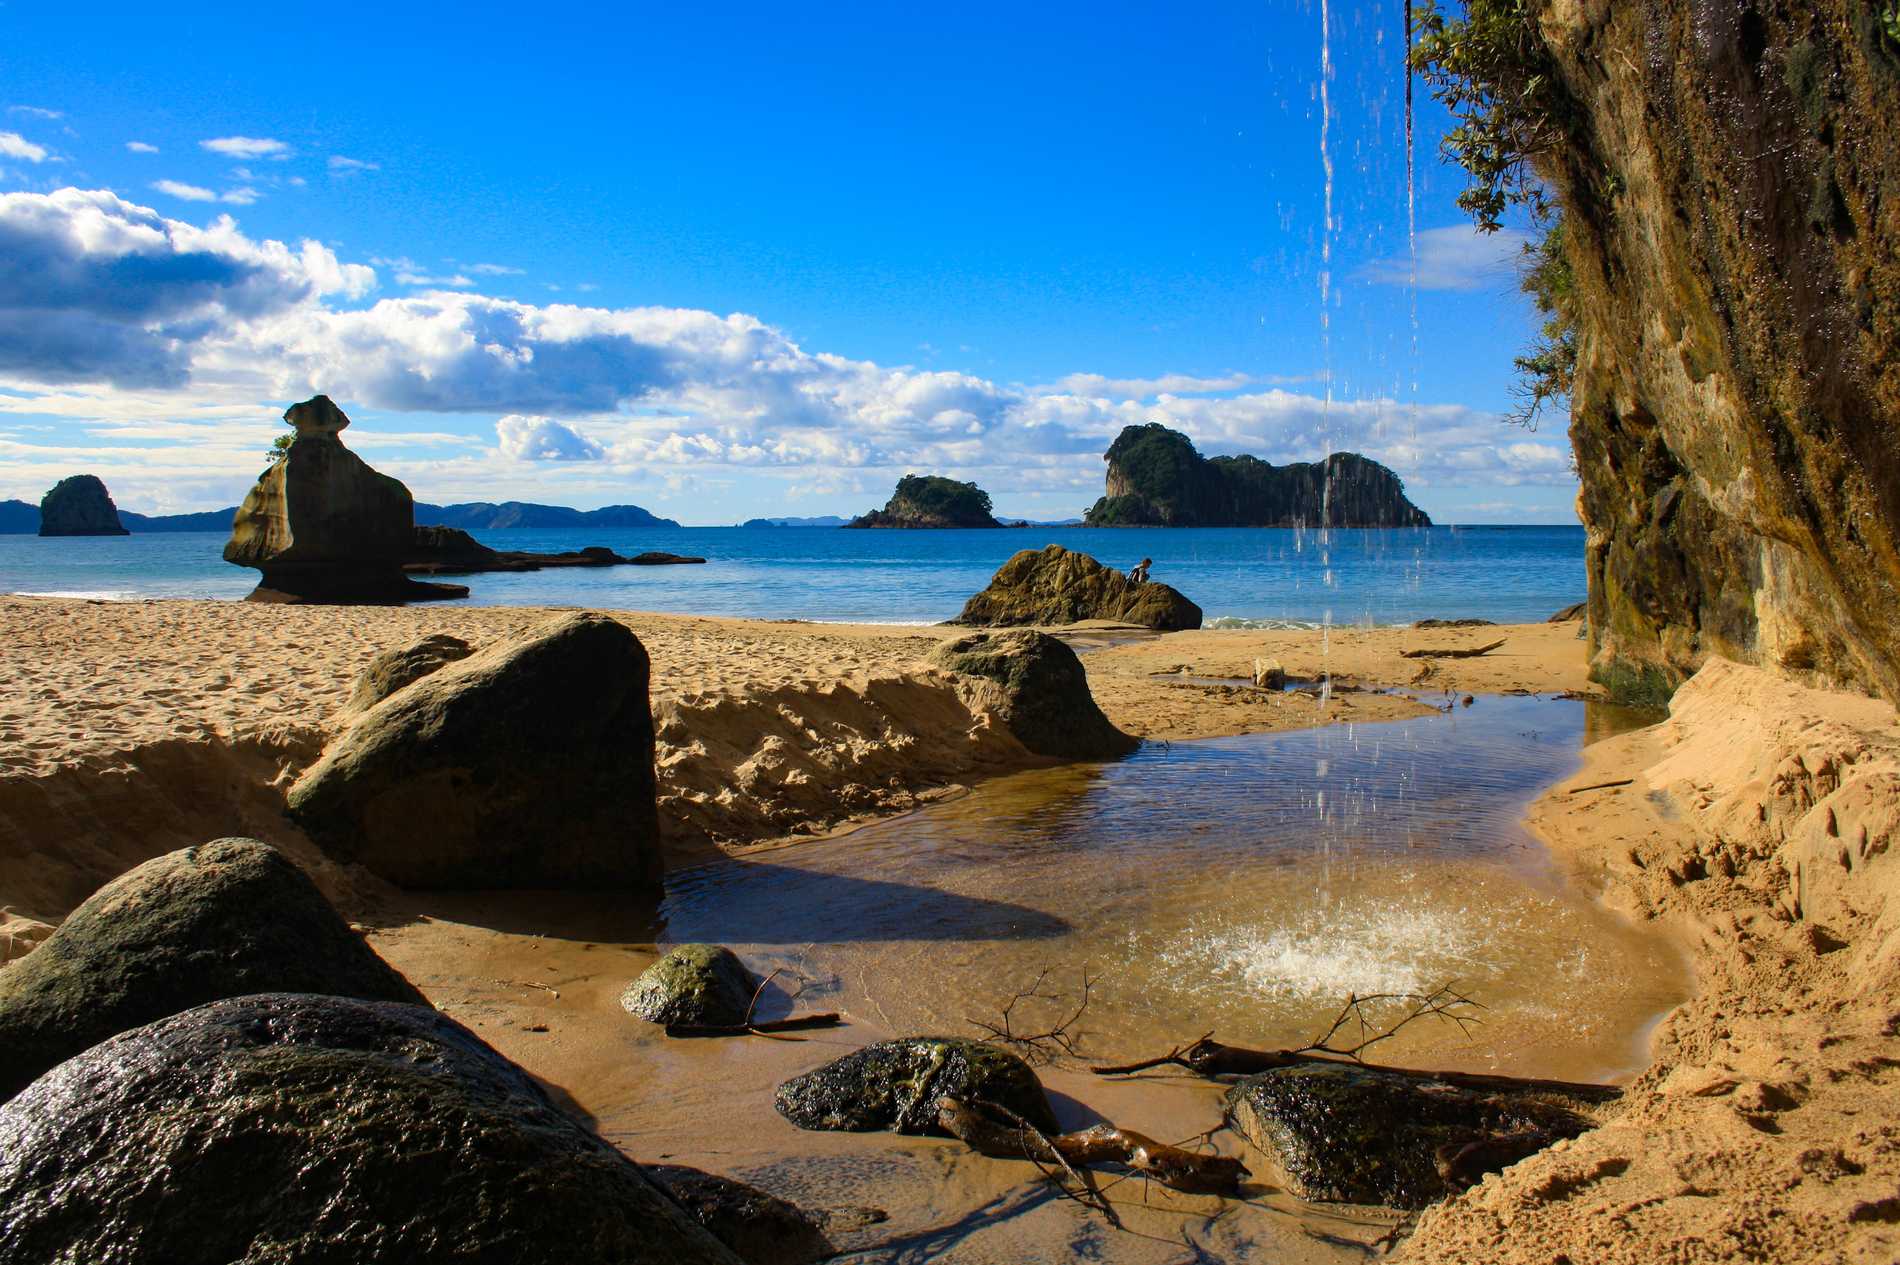 Cathedral Cove – Coromandel Peninsula, New Zealand: Te Whanganui-A-Hei (Cathedral Cove) is one of the most photographed natural attractions in New Zealand and becomes even more busy during the summer holidays in January. It’s worth wandering away from the central attraction, the huge sandstone arch, and exploring the beaches on either side, which are beautiful in their own right.